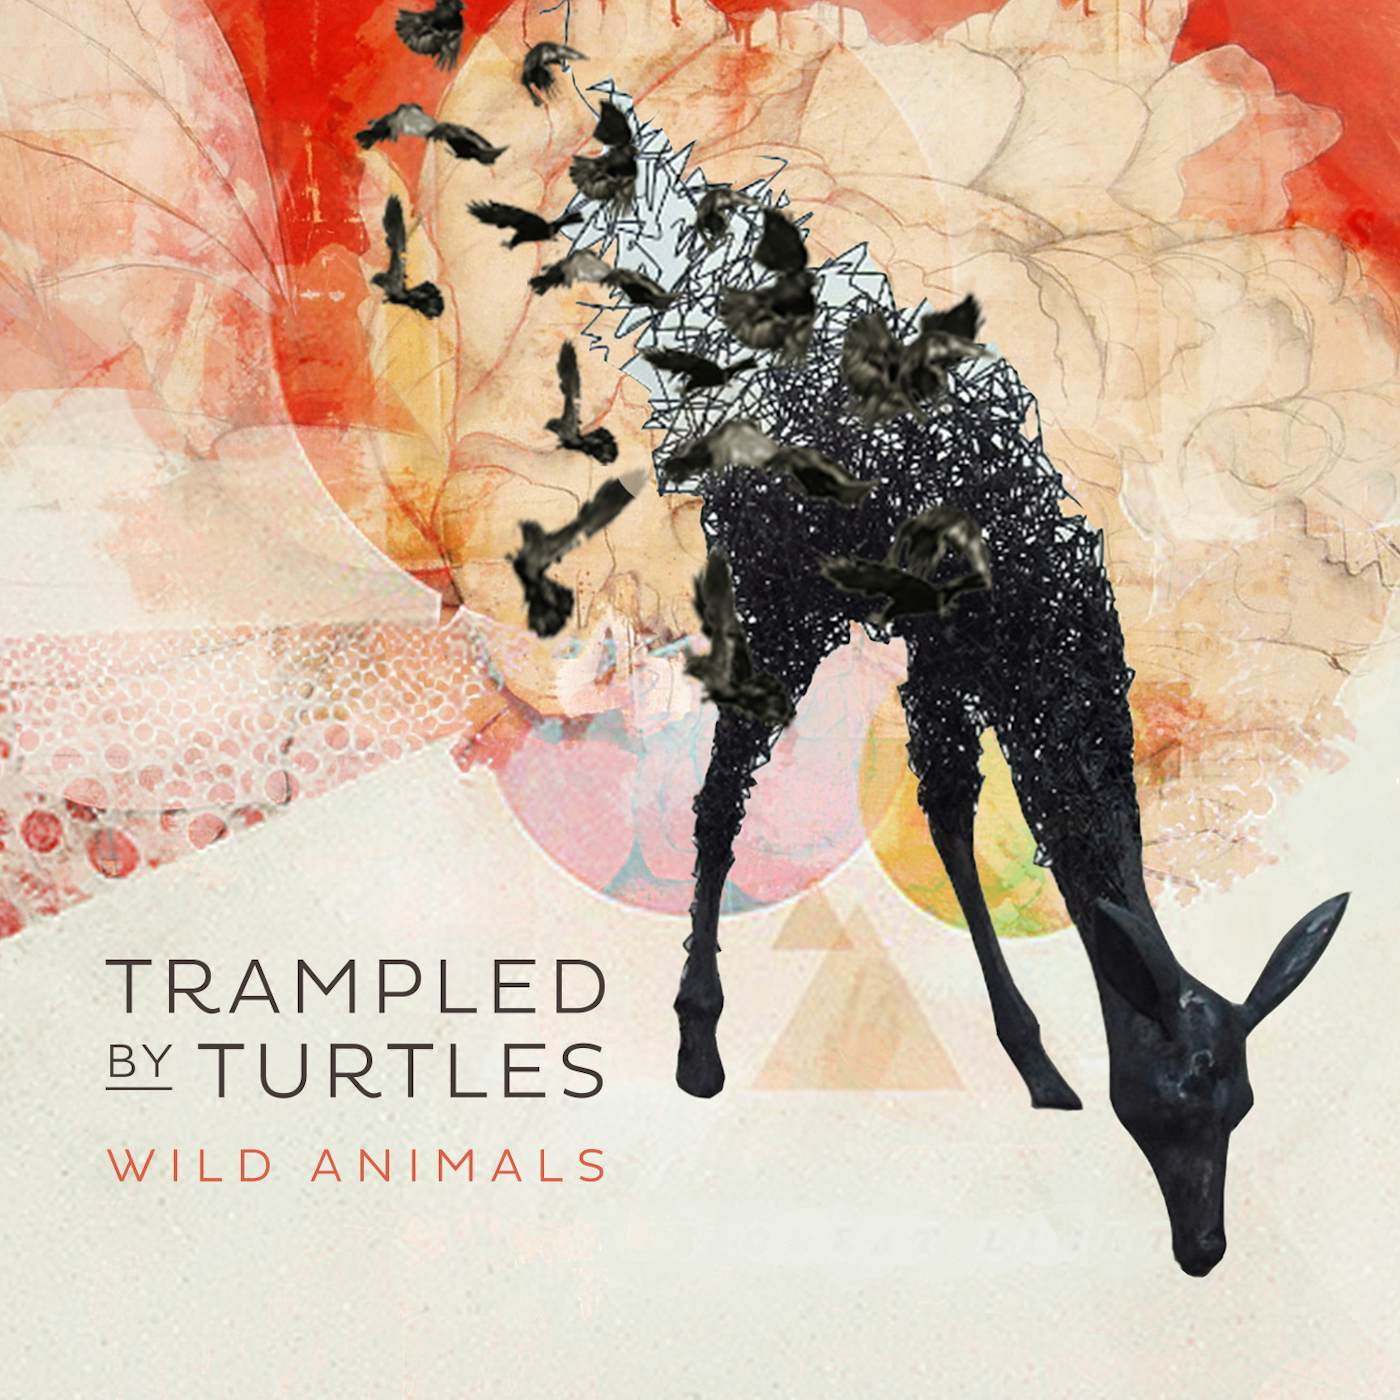 Trampled by Turtles WILD ANIMALS CD